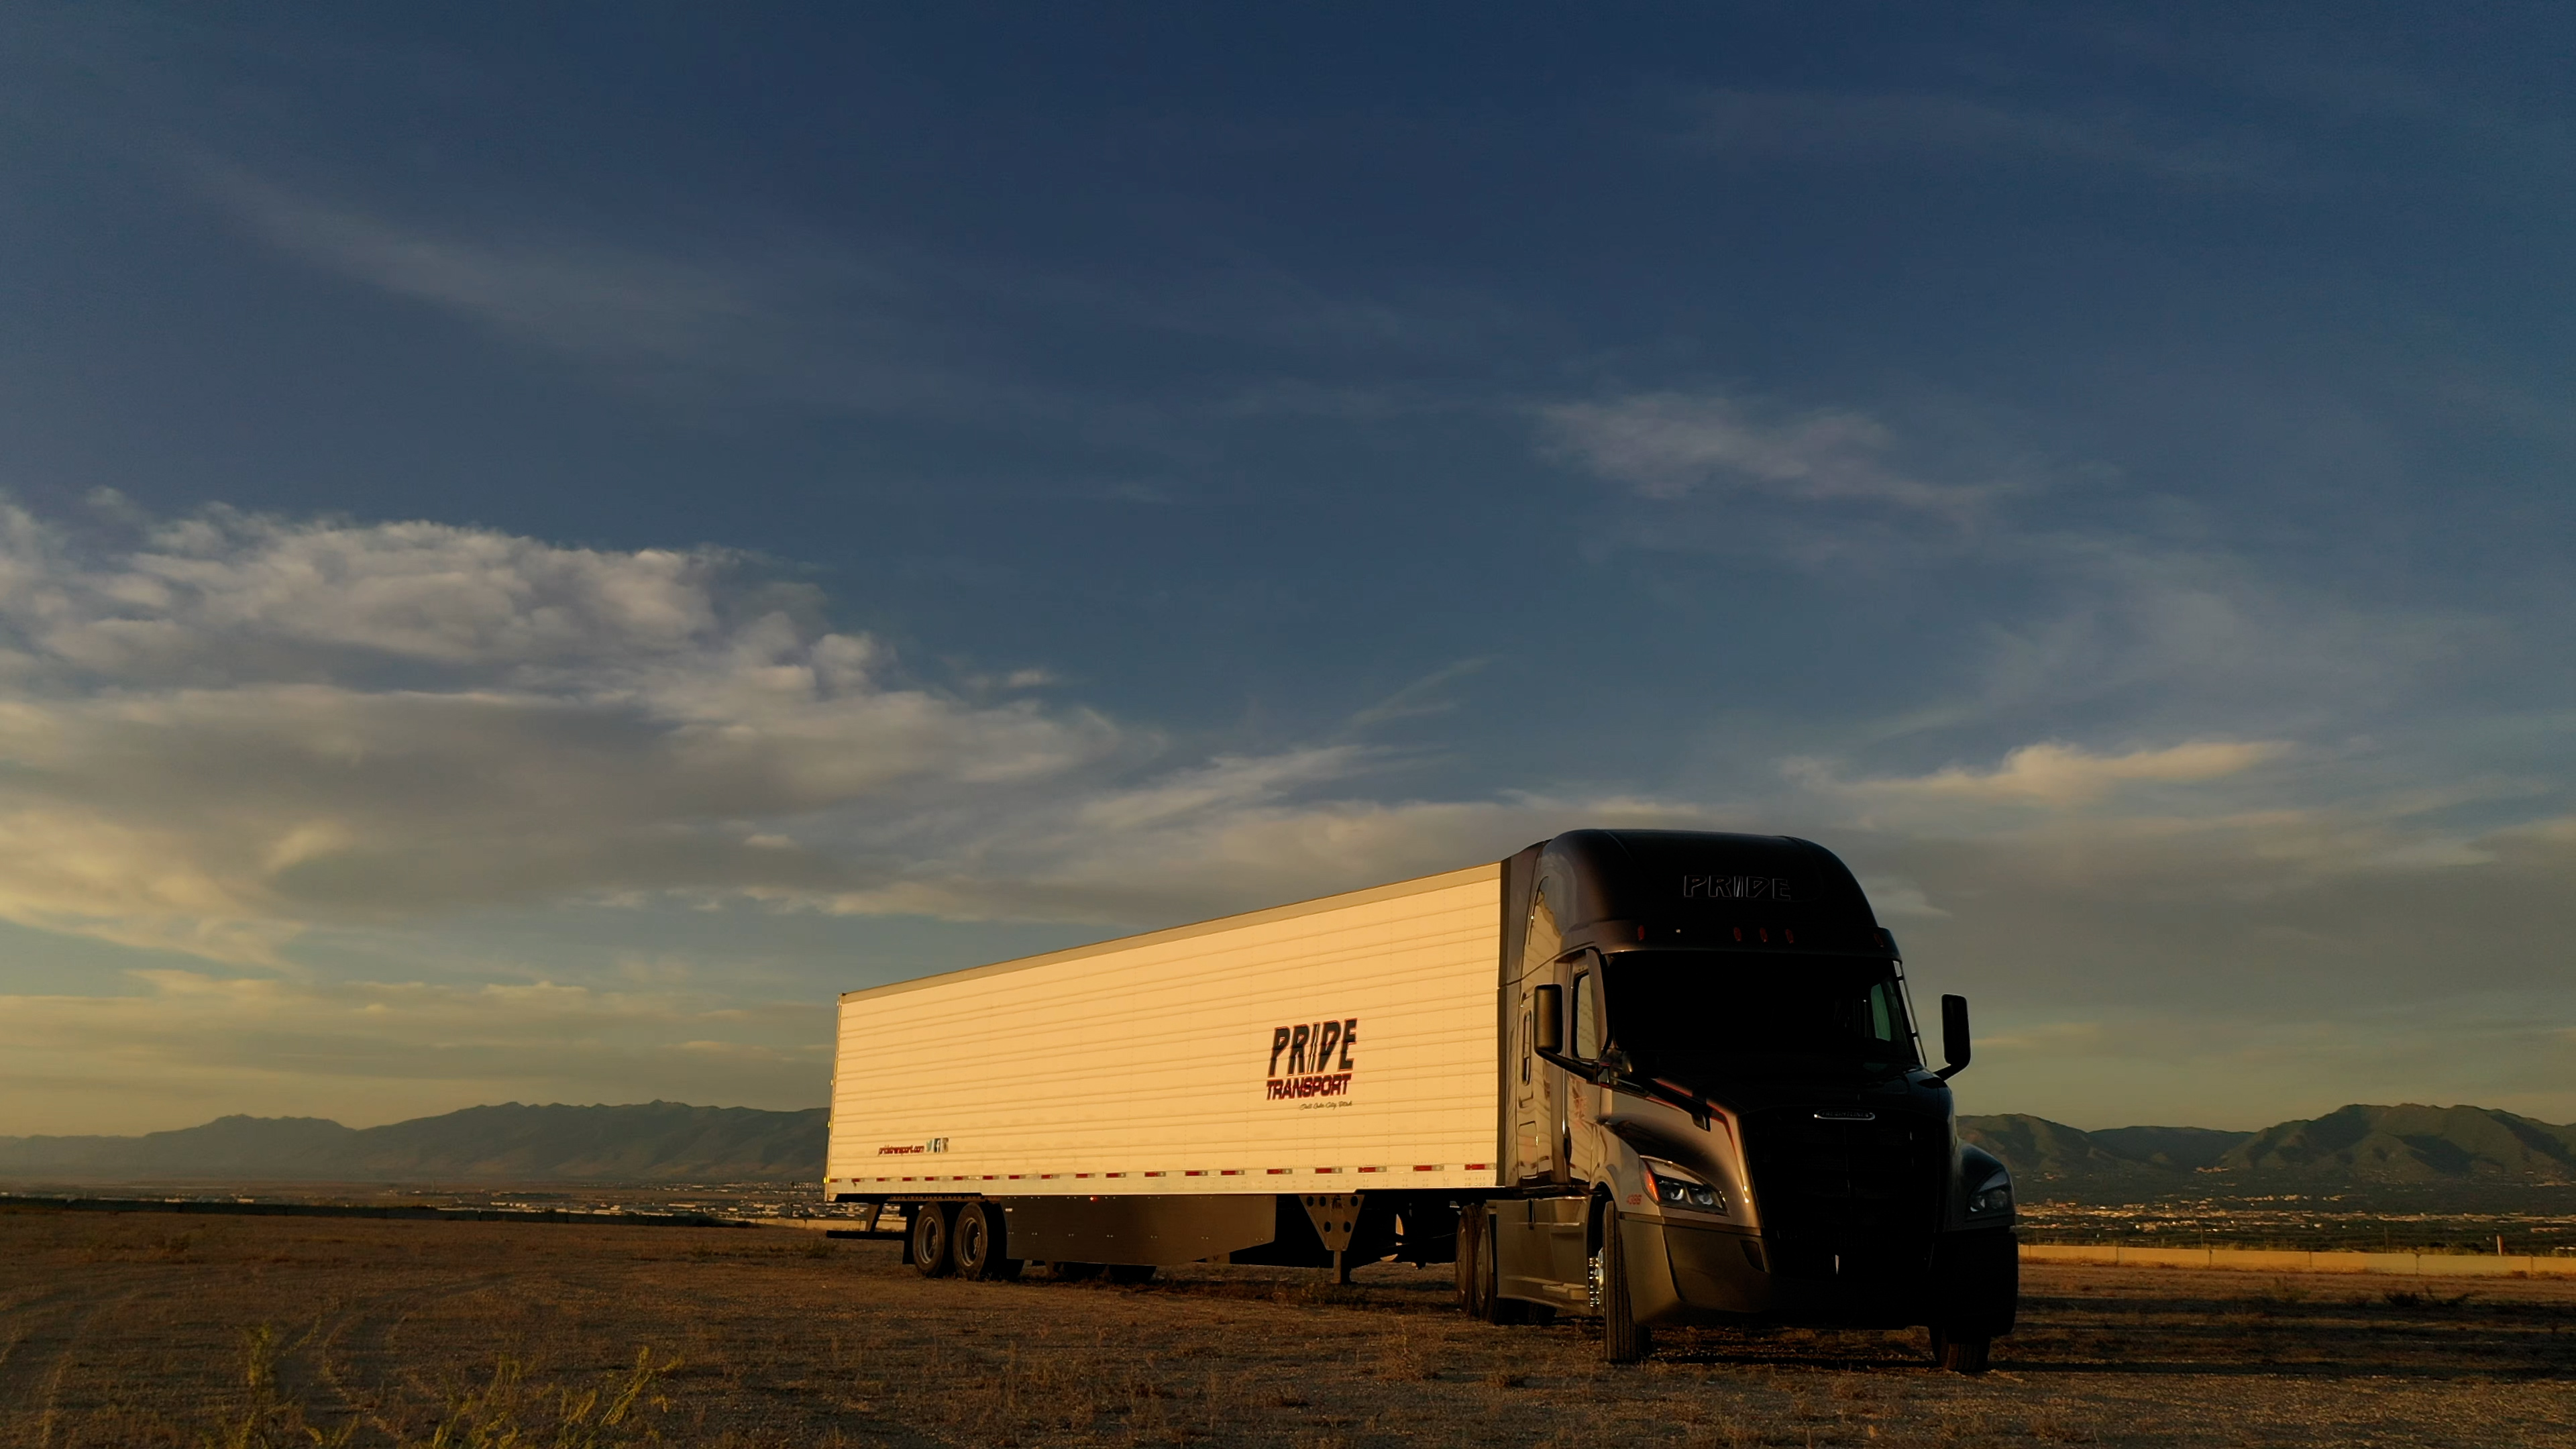 Pride Transport truck parked in a vacant dirt field with mountains in the background